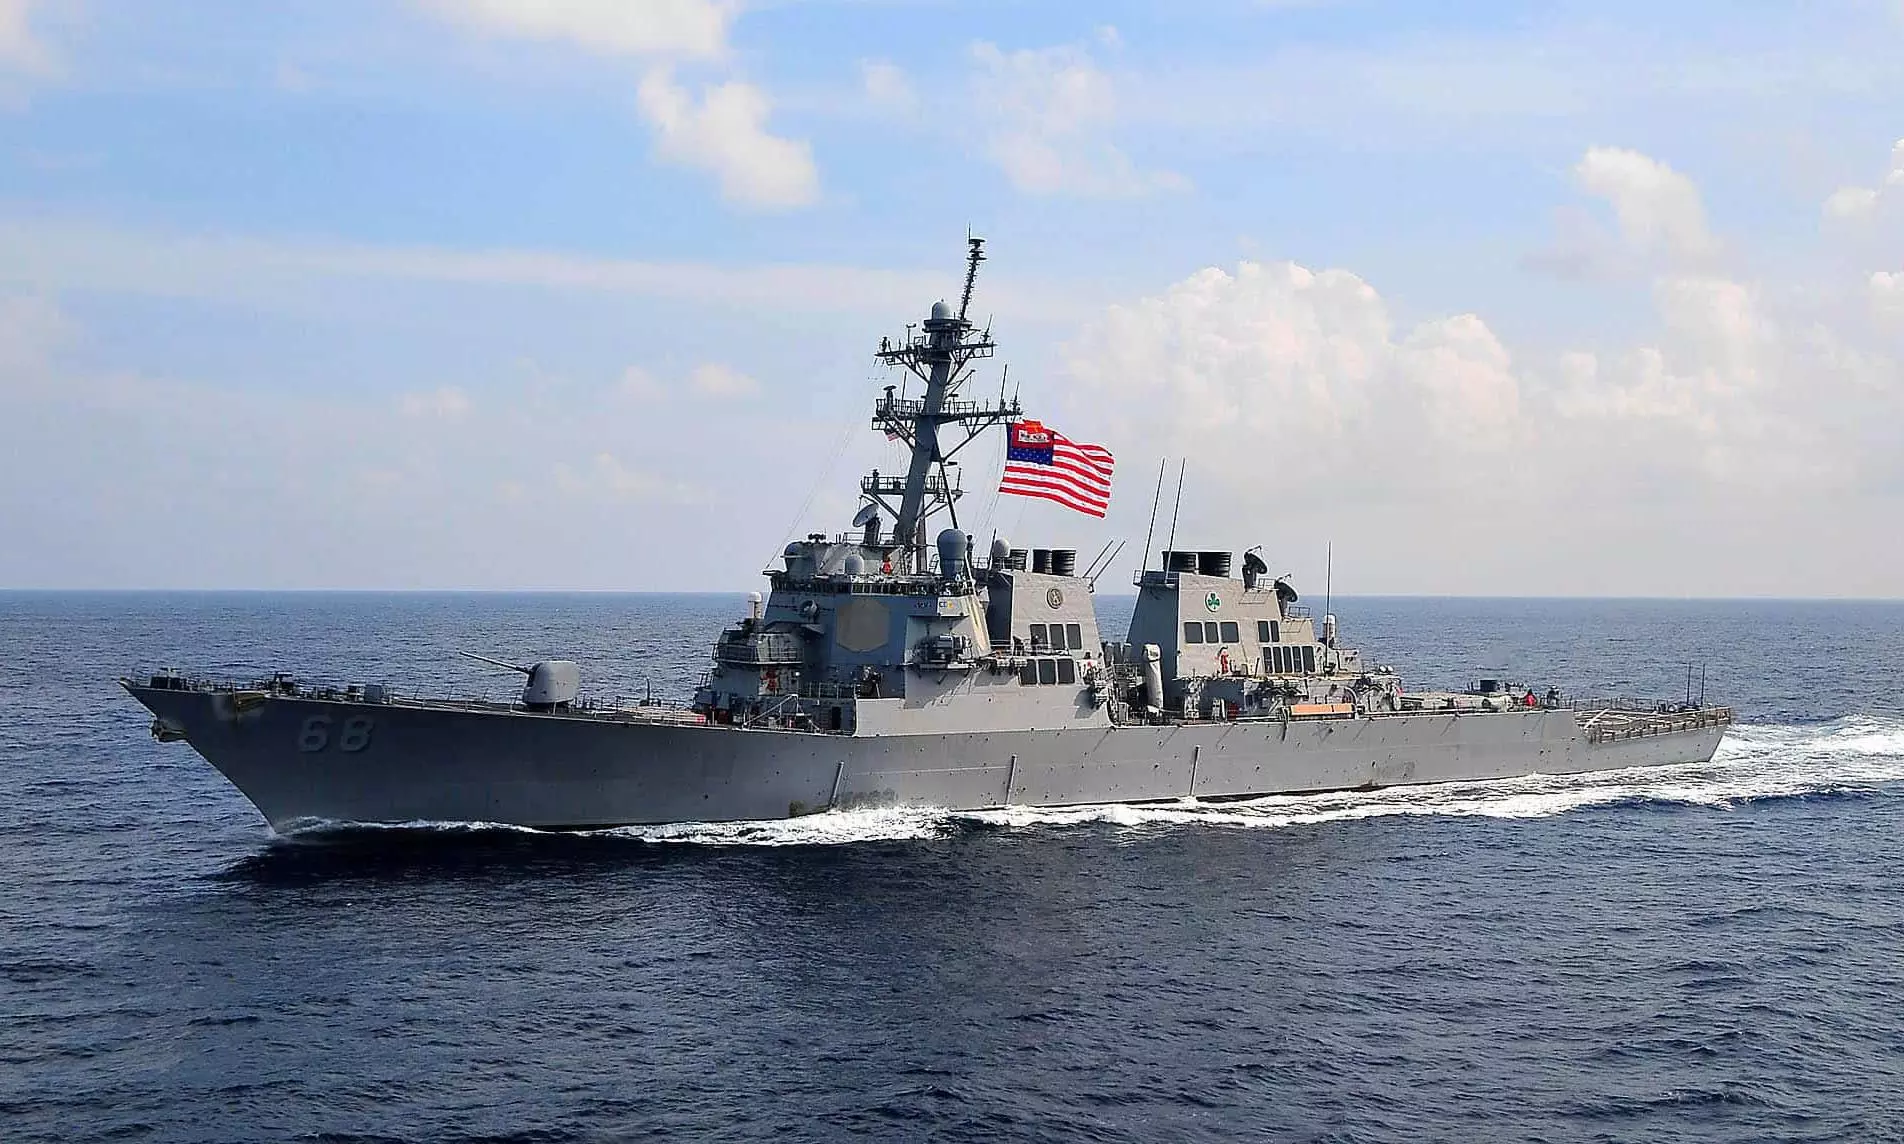 US attack continues against Houthis, ship catch fire in Red Sea